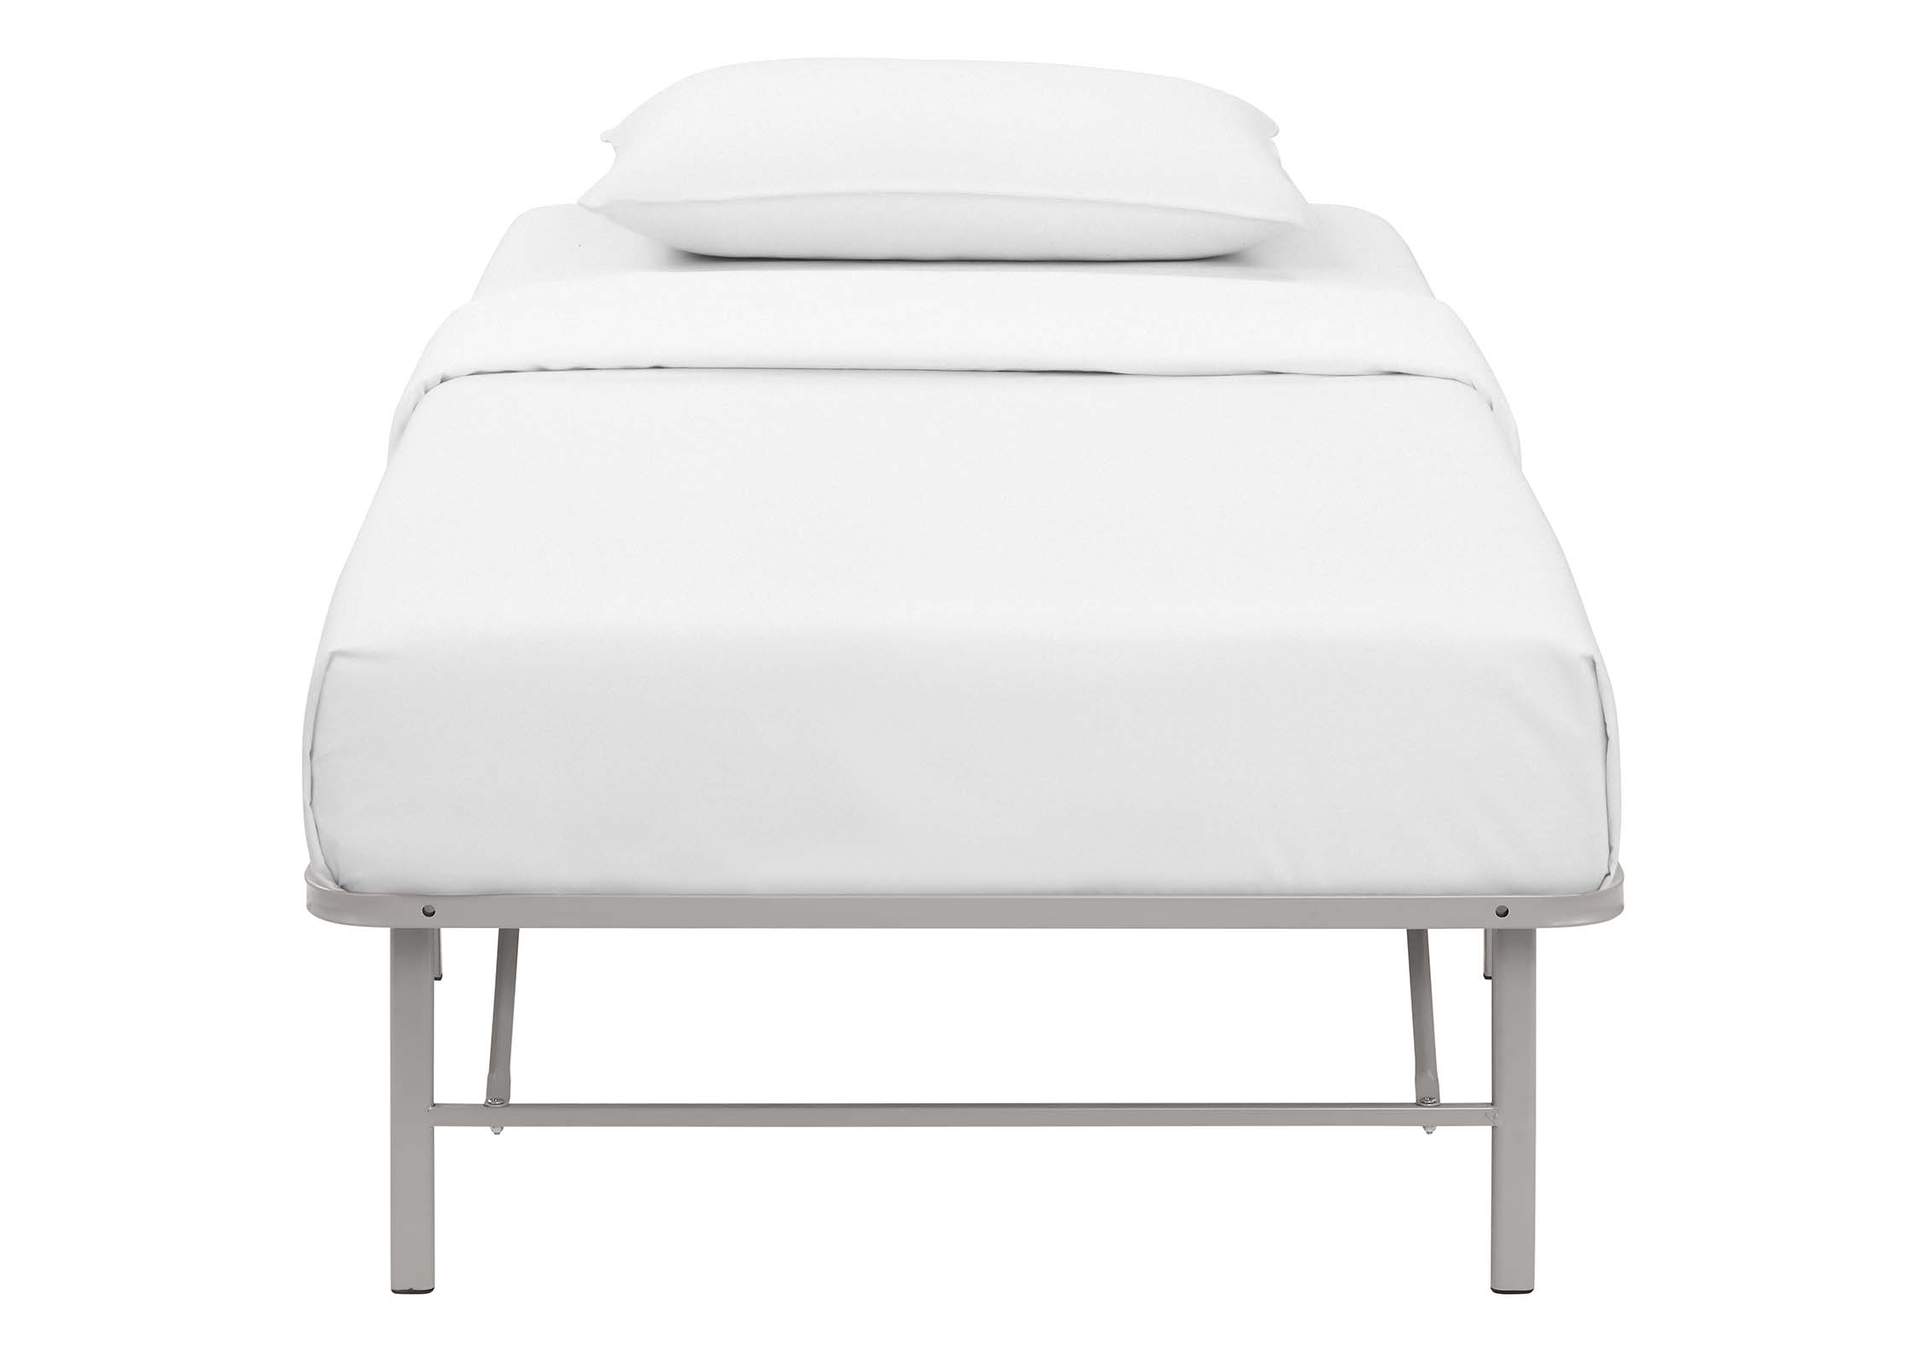 Gray Horizon Twin Bed - Stainless Steel Frame,Modway